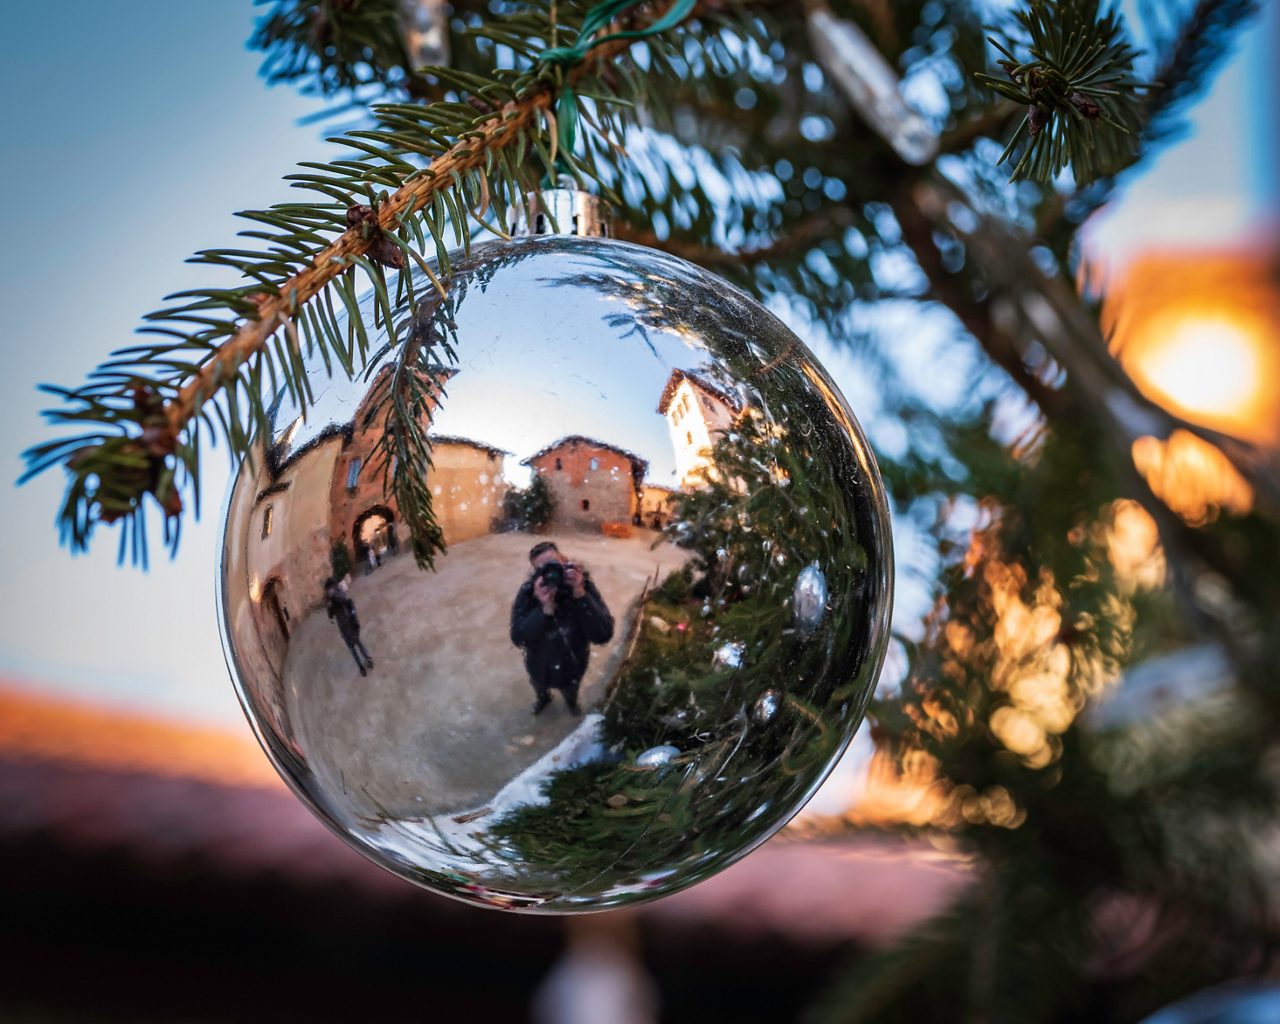 Ricetto of Candelo, Biella, Piedmont, Italy: Medieval village reflected in a Christmas ball 